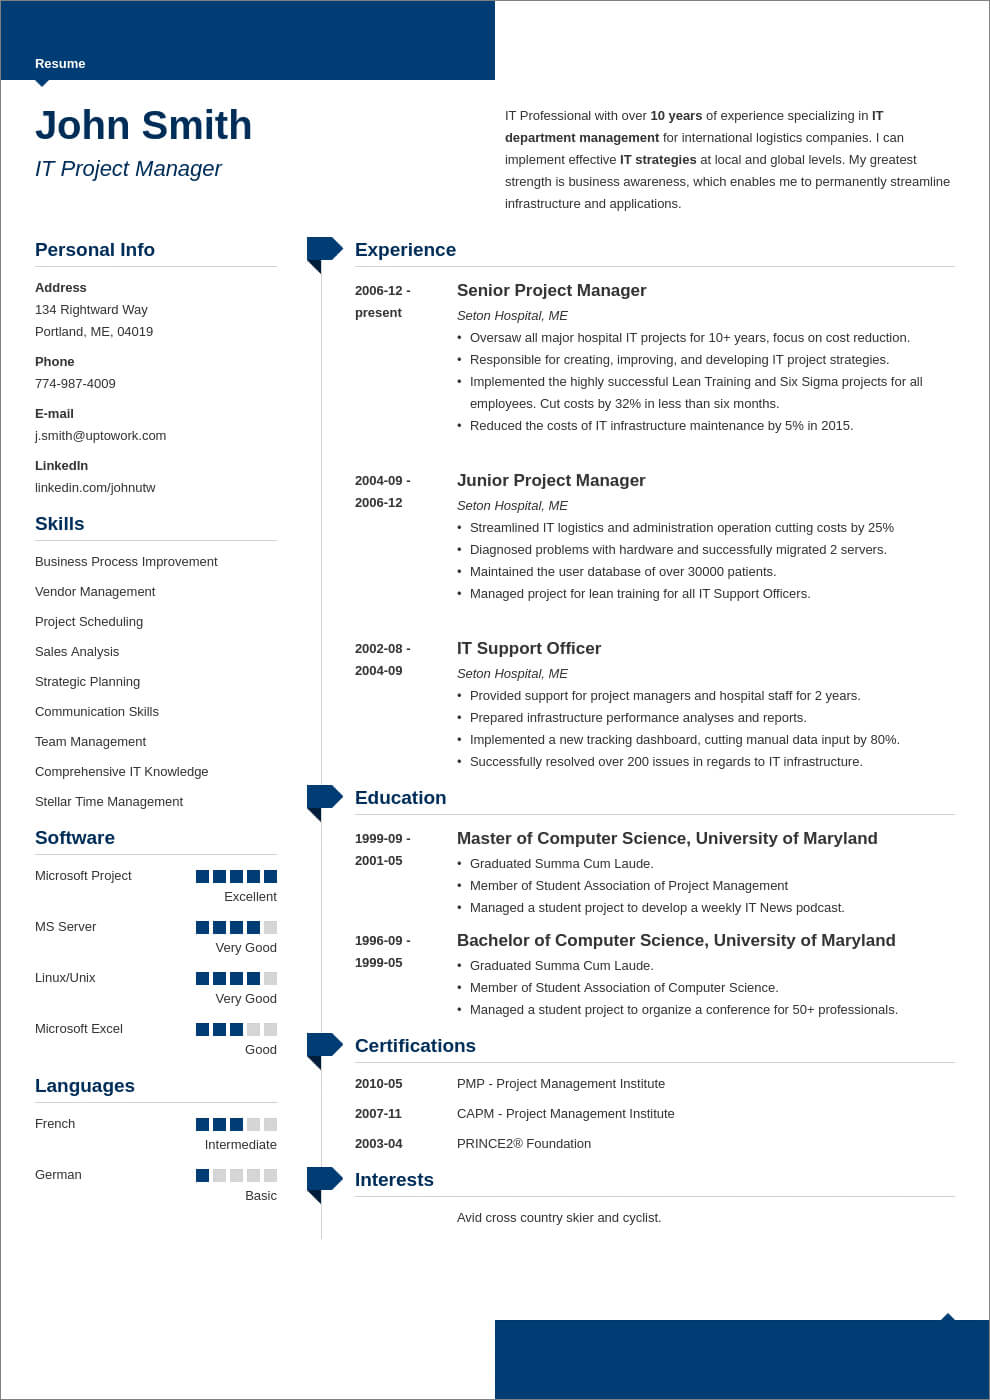 10+ ATS Friendly Resume Templates for 2022